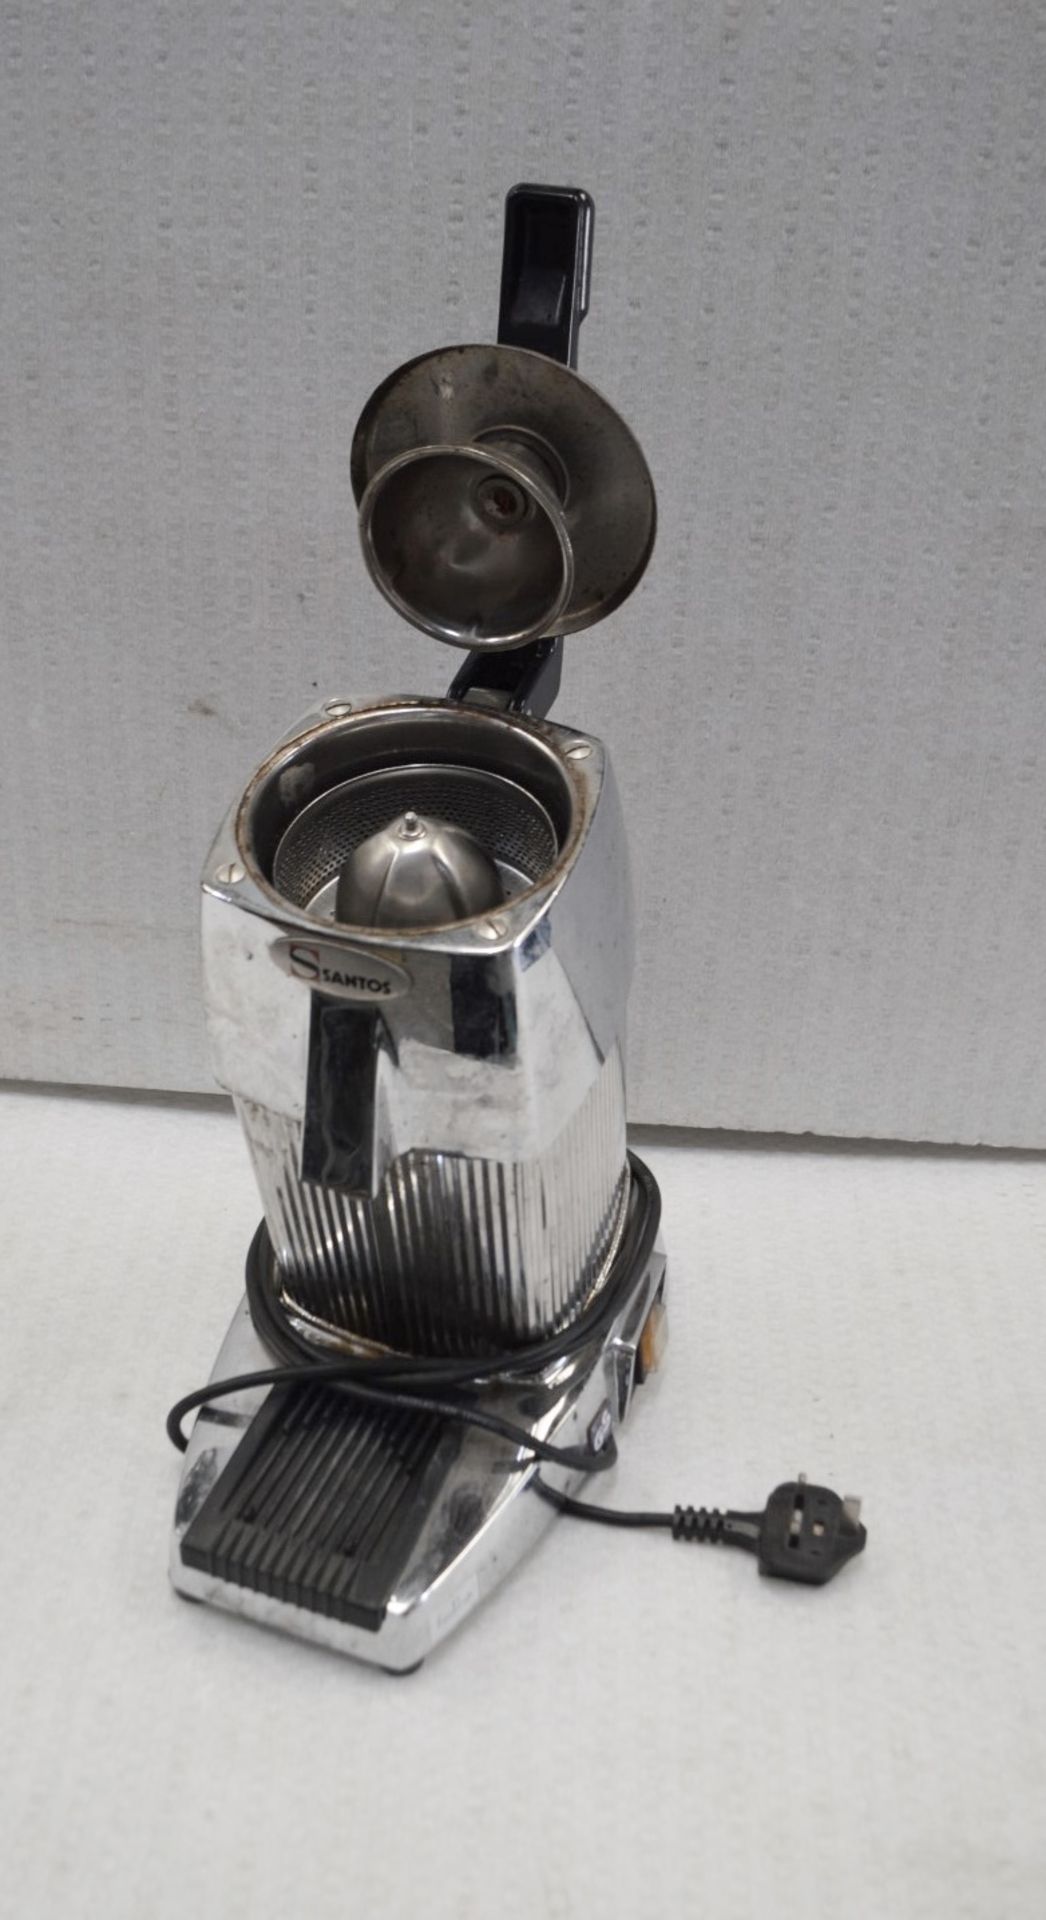 1 x Santos French Handmade Juicer - (220-240volts) - Recently Removed From A Commercial Restaurant